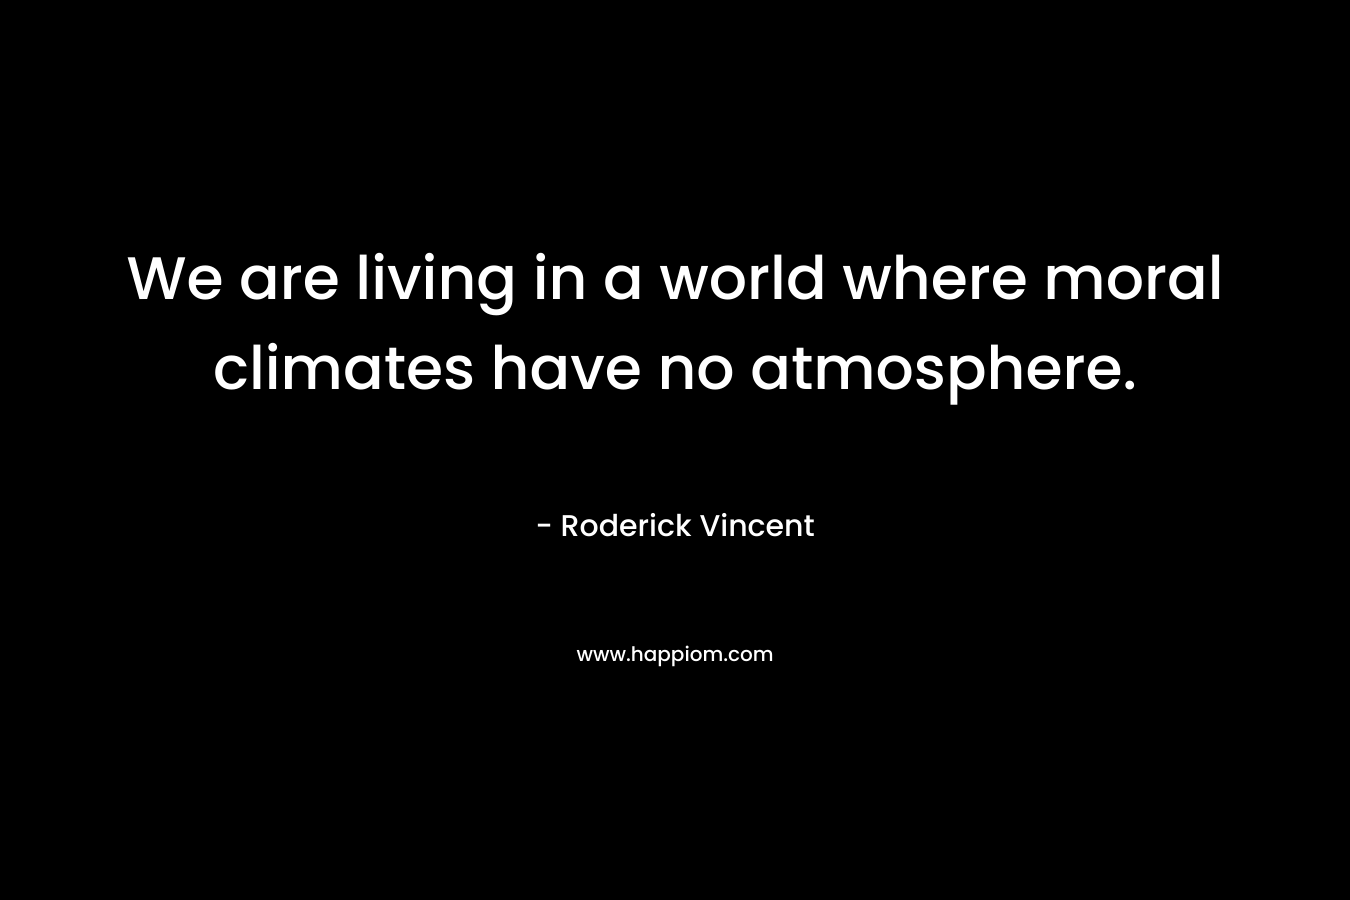 We are living in a world where moral climates have no atmosphere. – Roderick Vincent